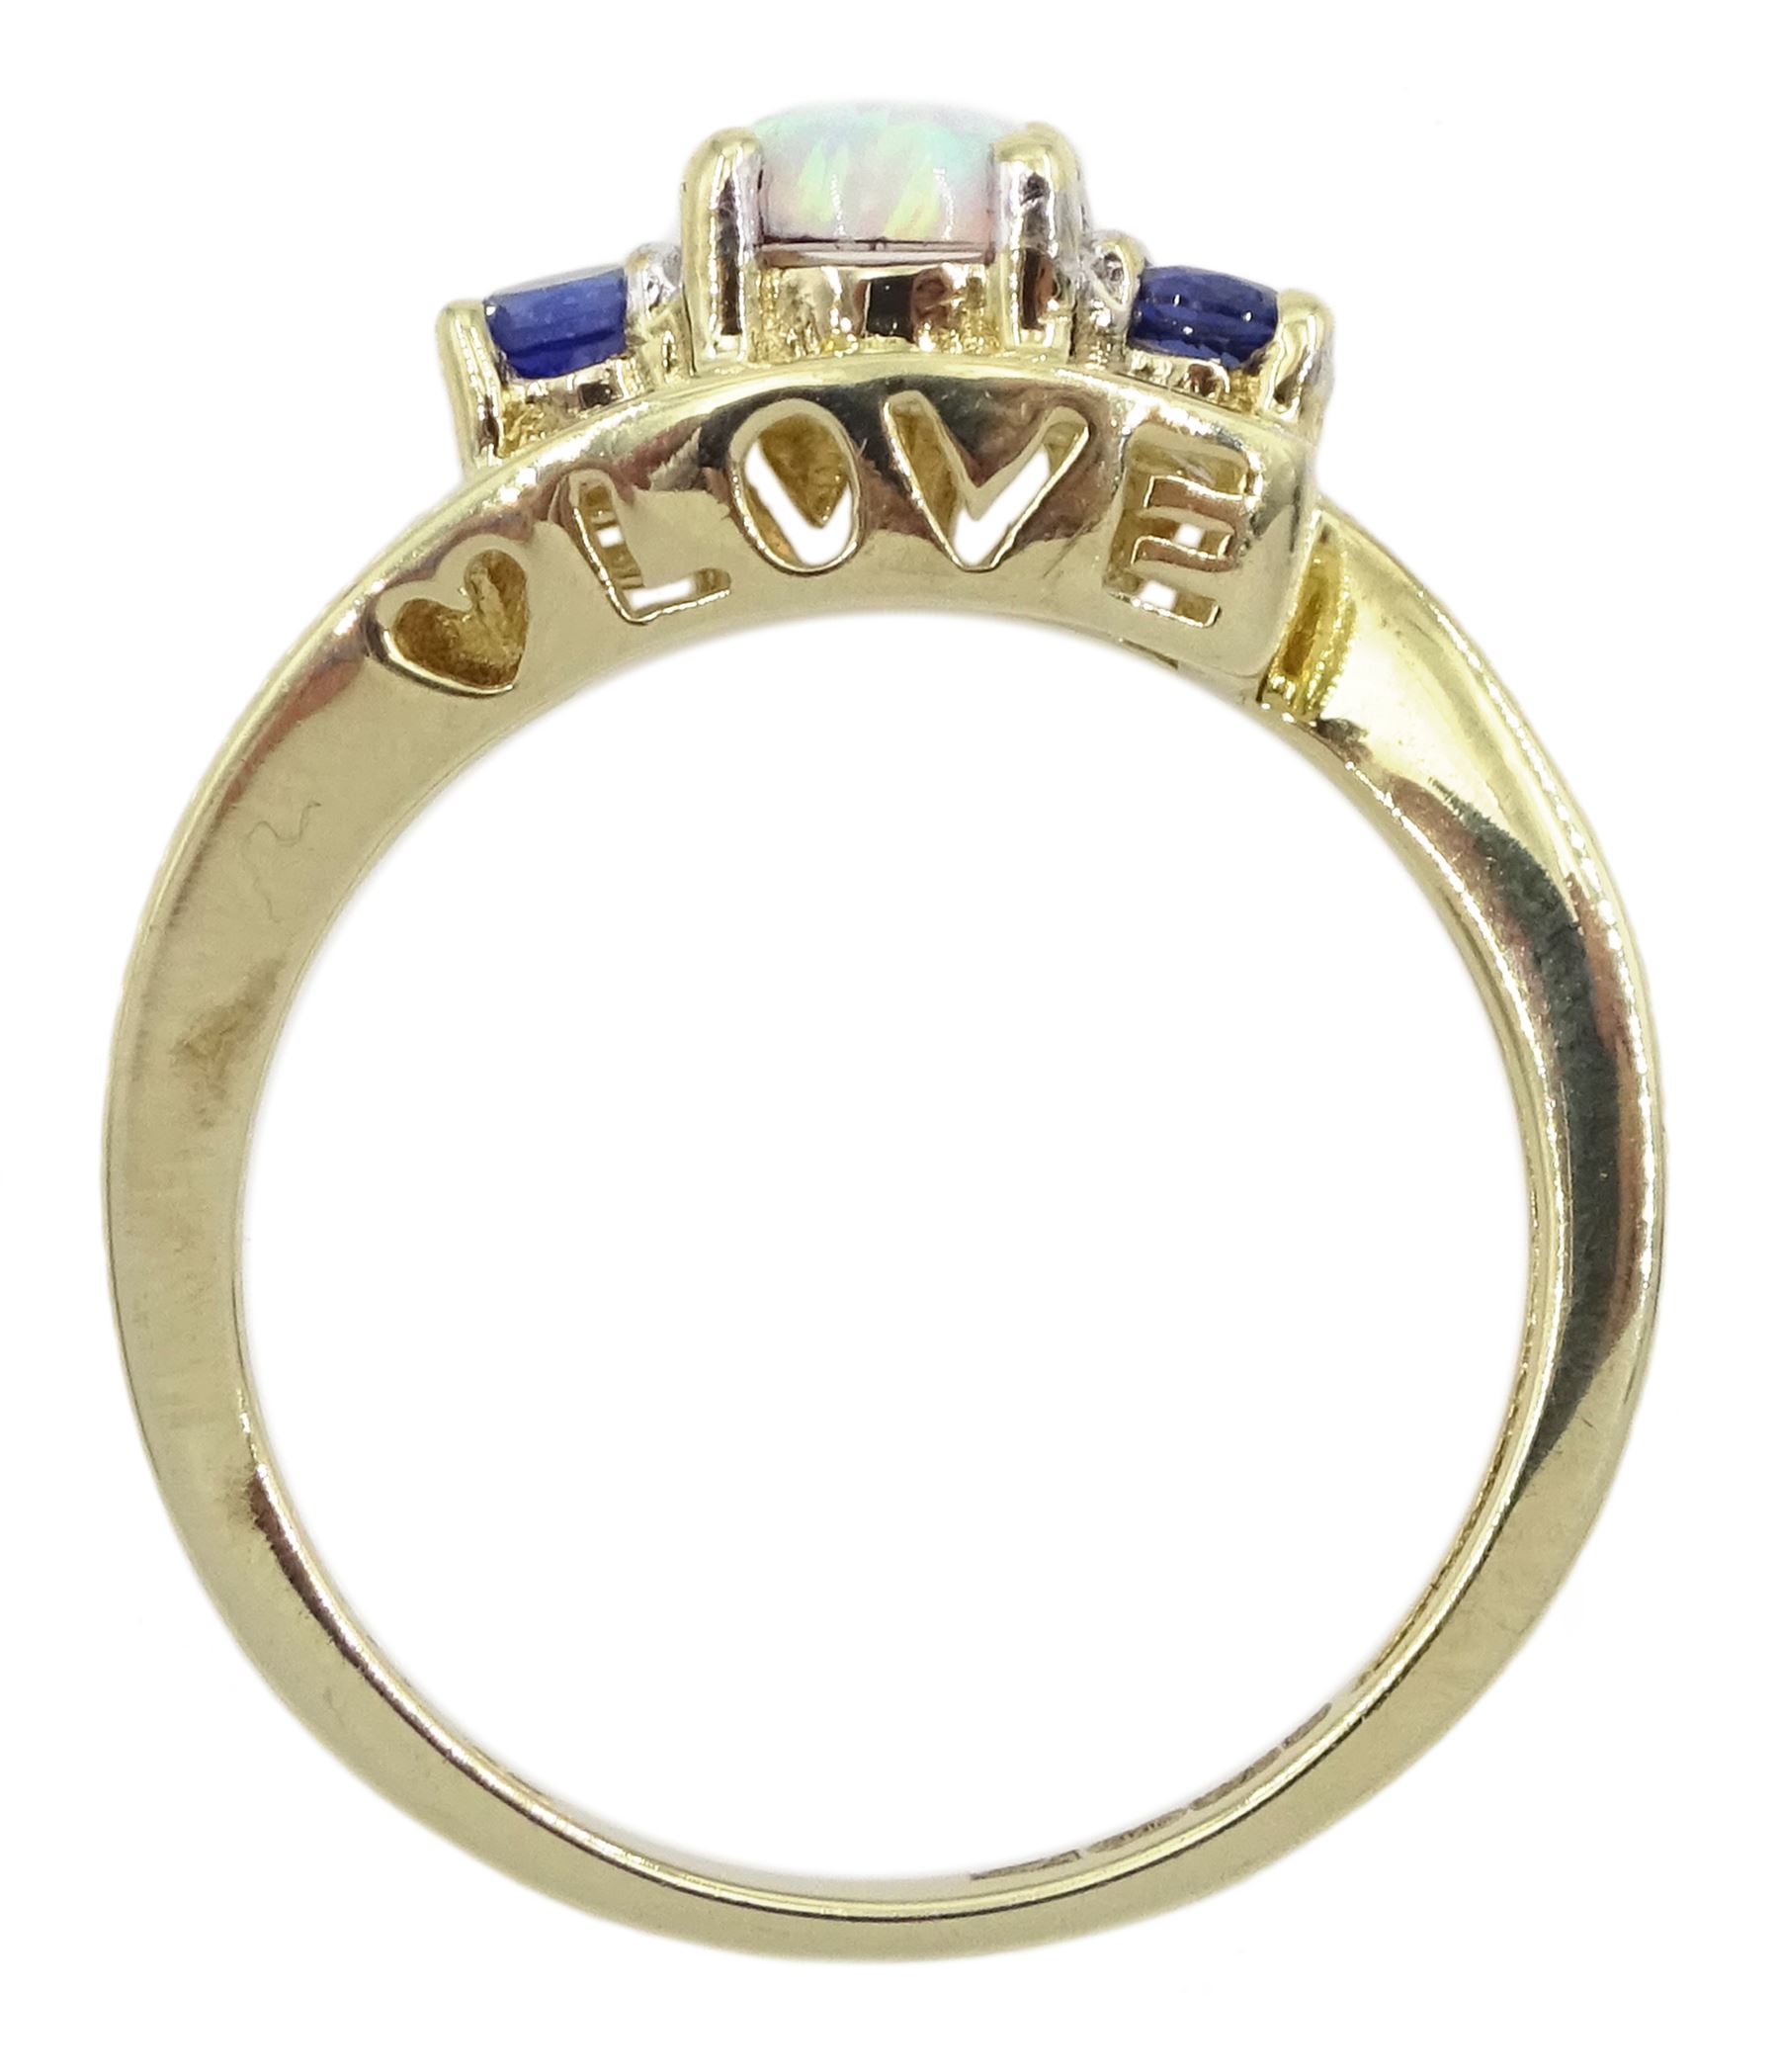 9ct gold opal and sapphire ring with 'love' gallery - Image 4 of 7